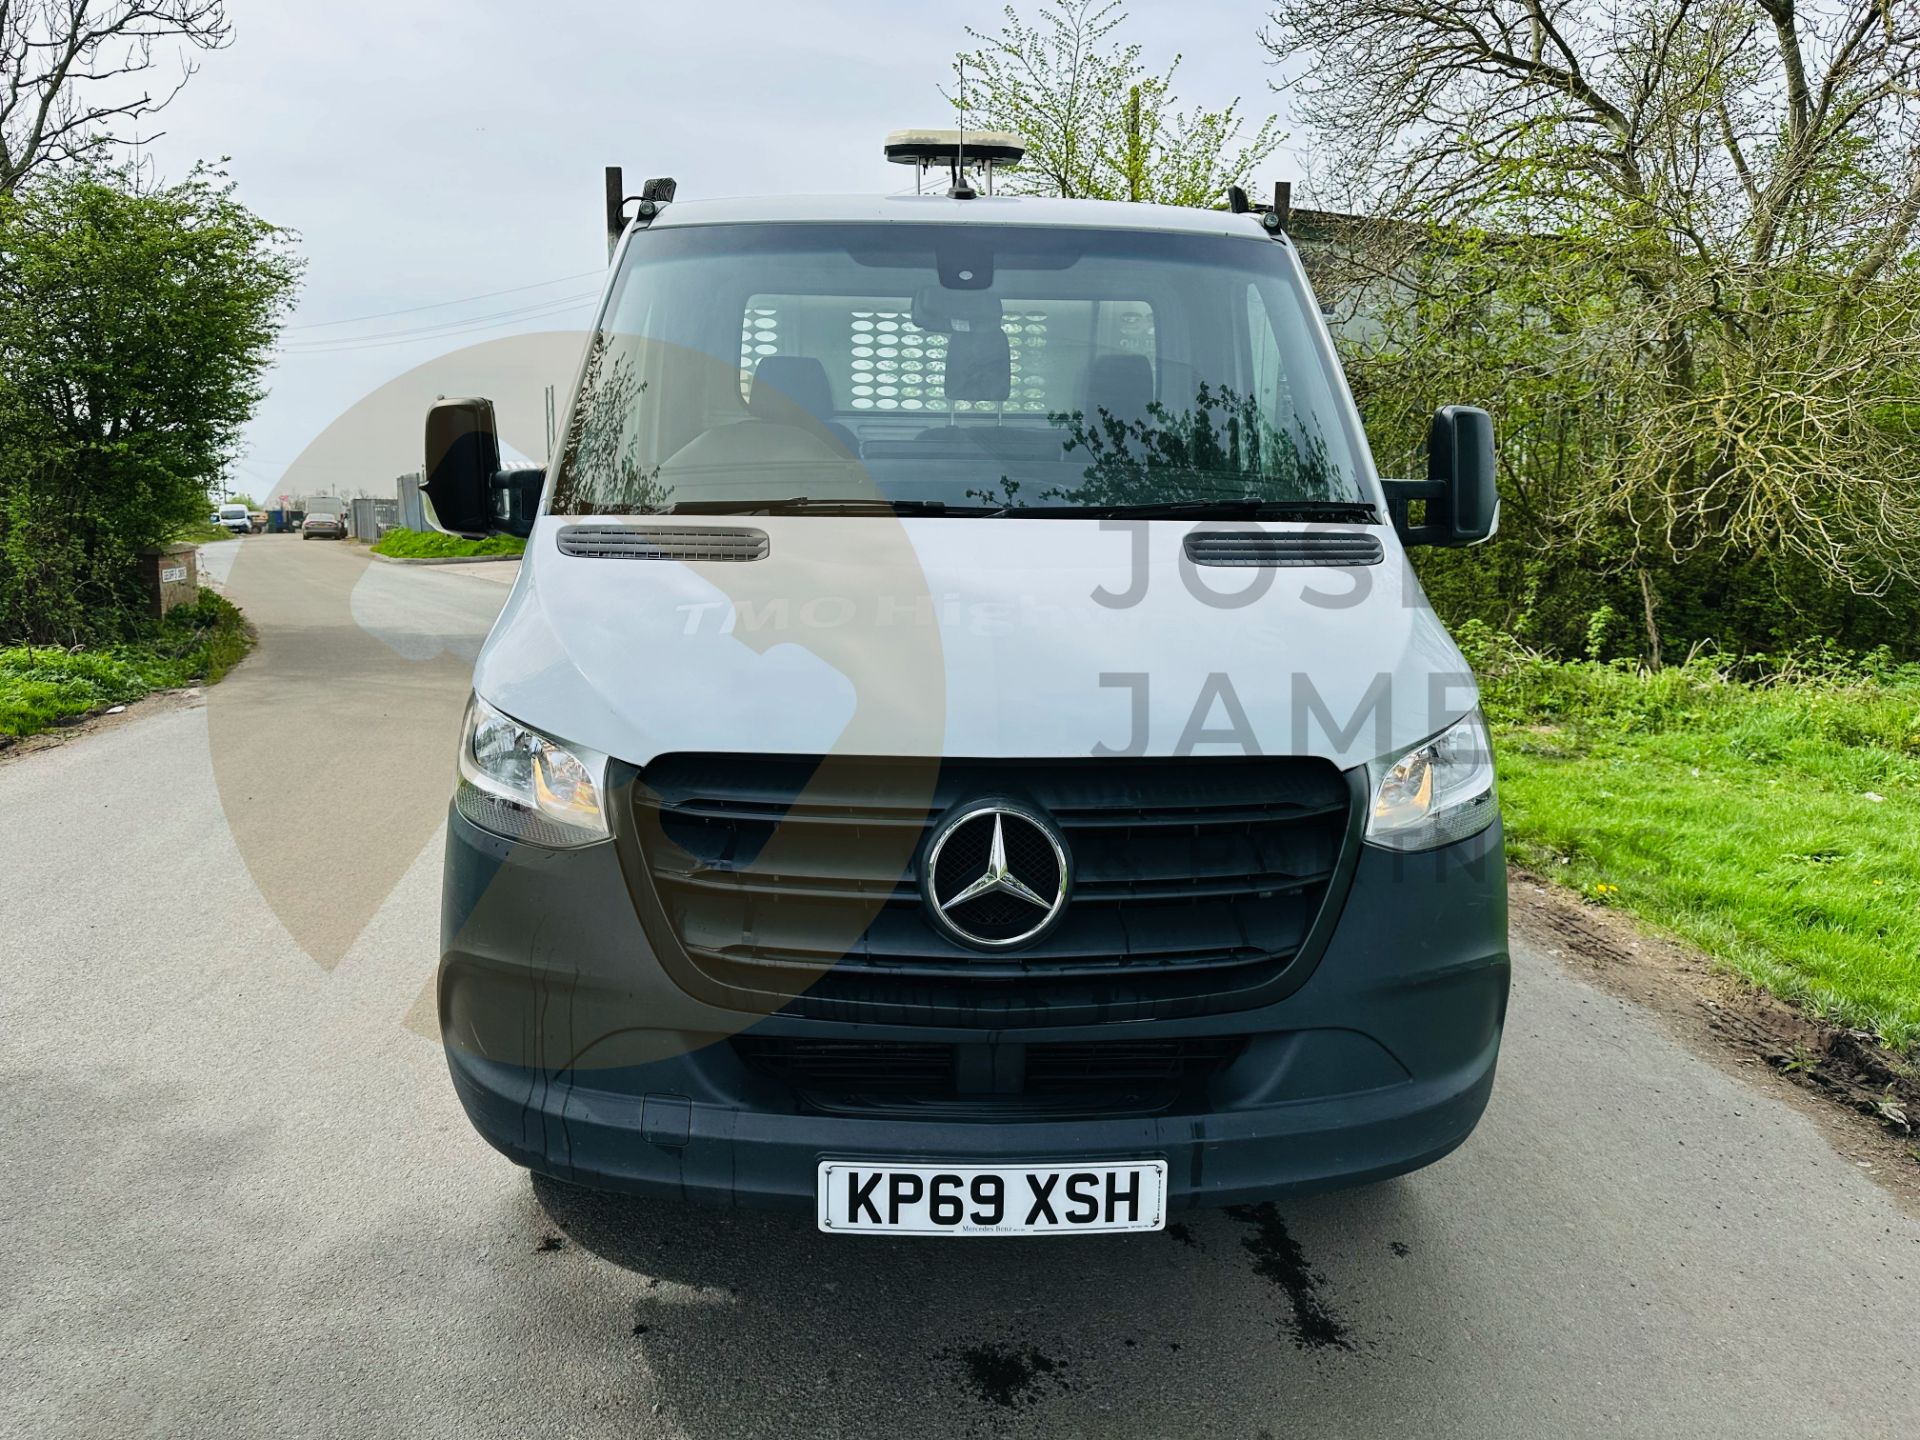 MERCEDES SPRINTER 316CDI LONG WHEEL BASE DROPSIDE WITH ELECTRIC TAIL LIFT -2020 MODEL- 1 OWNER - FSH - Image 3 of 30